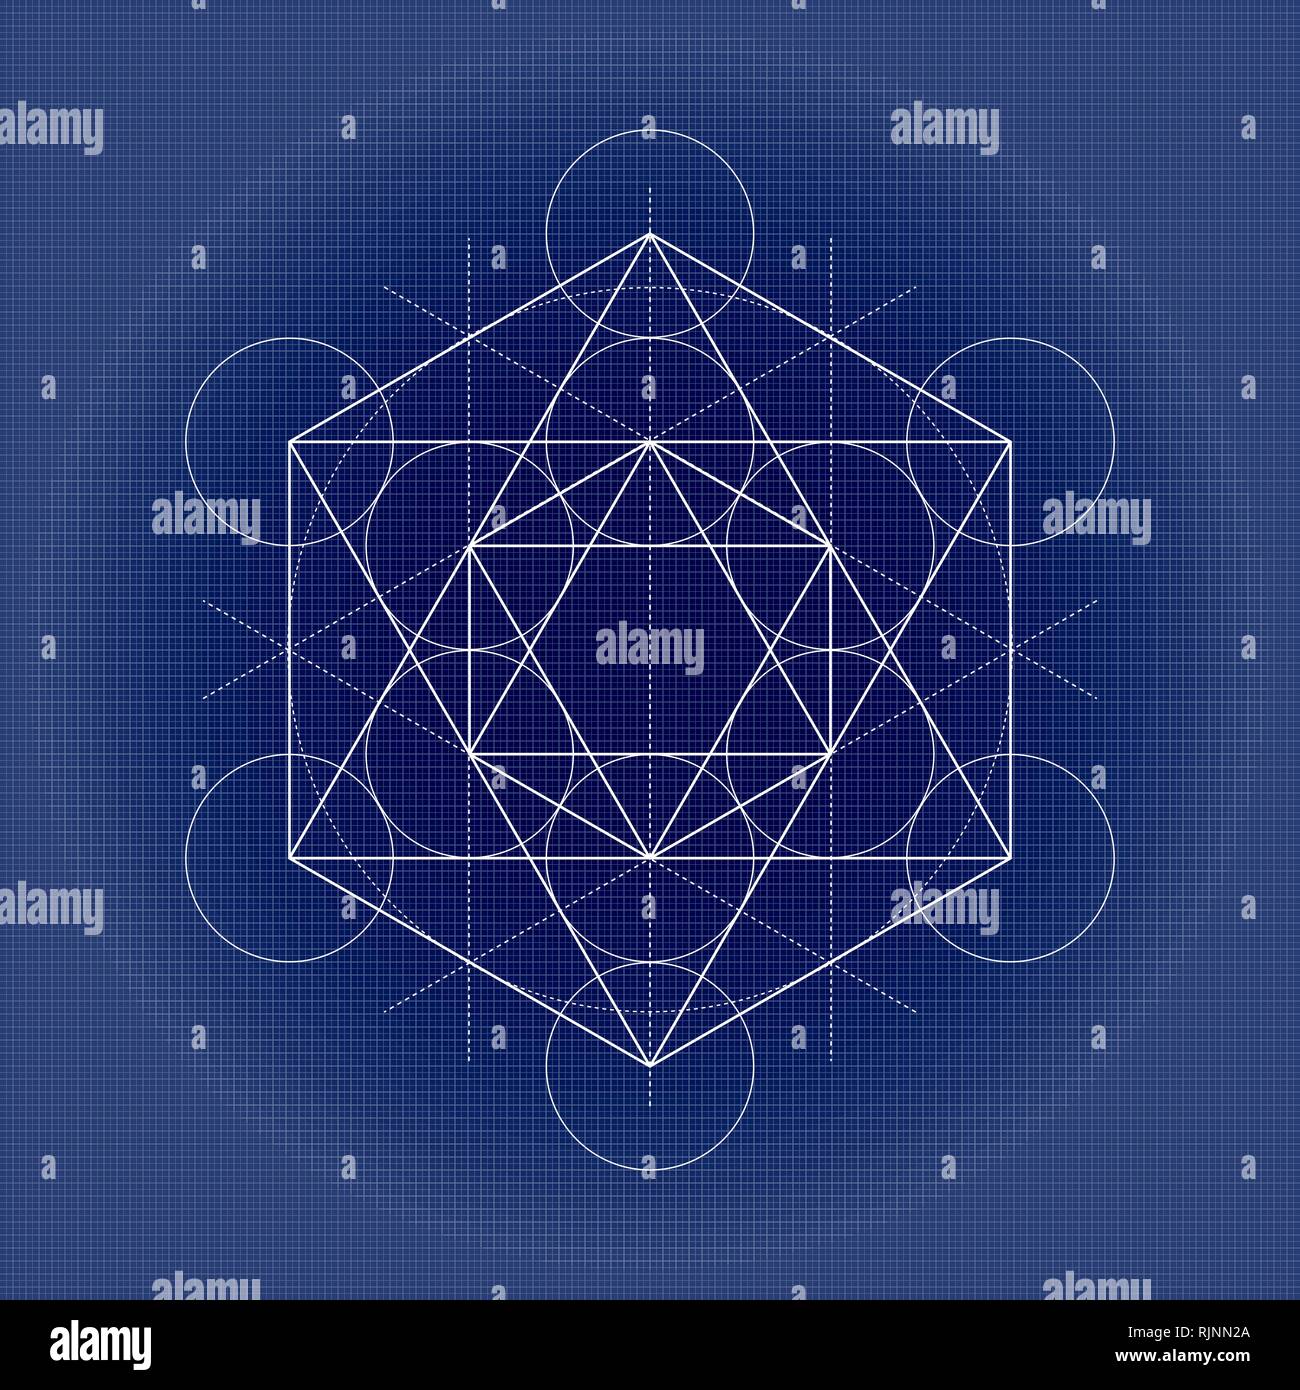 Metatrons cube, sacred geometry illustration on technical paper Stock Vector